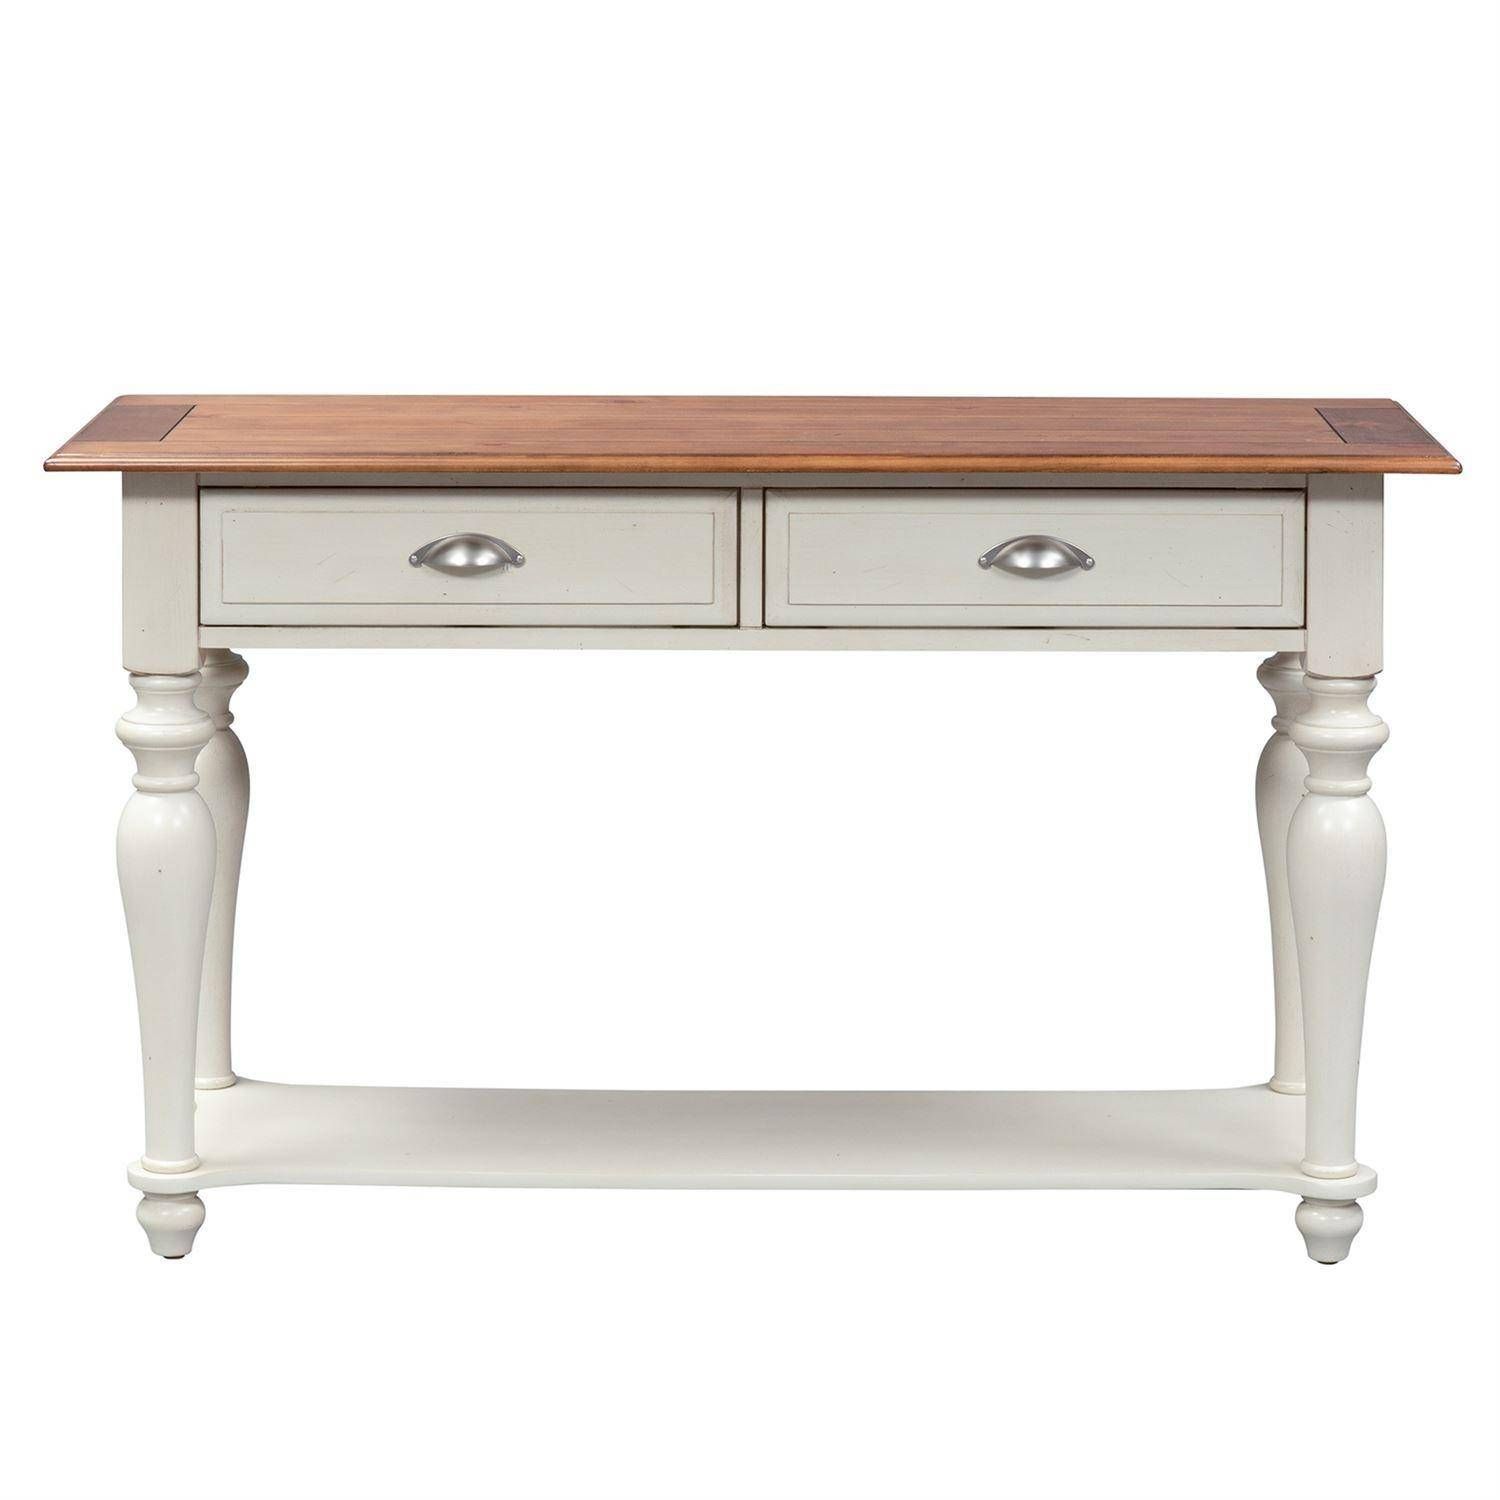 Traditional Brown Wood Console Table Ocean Isle (303 Ot Within Brown Console Tables (View 17 of 20)